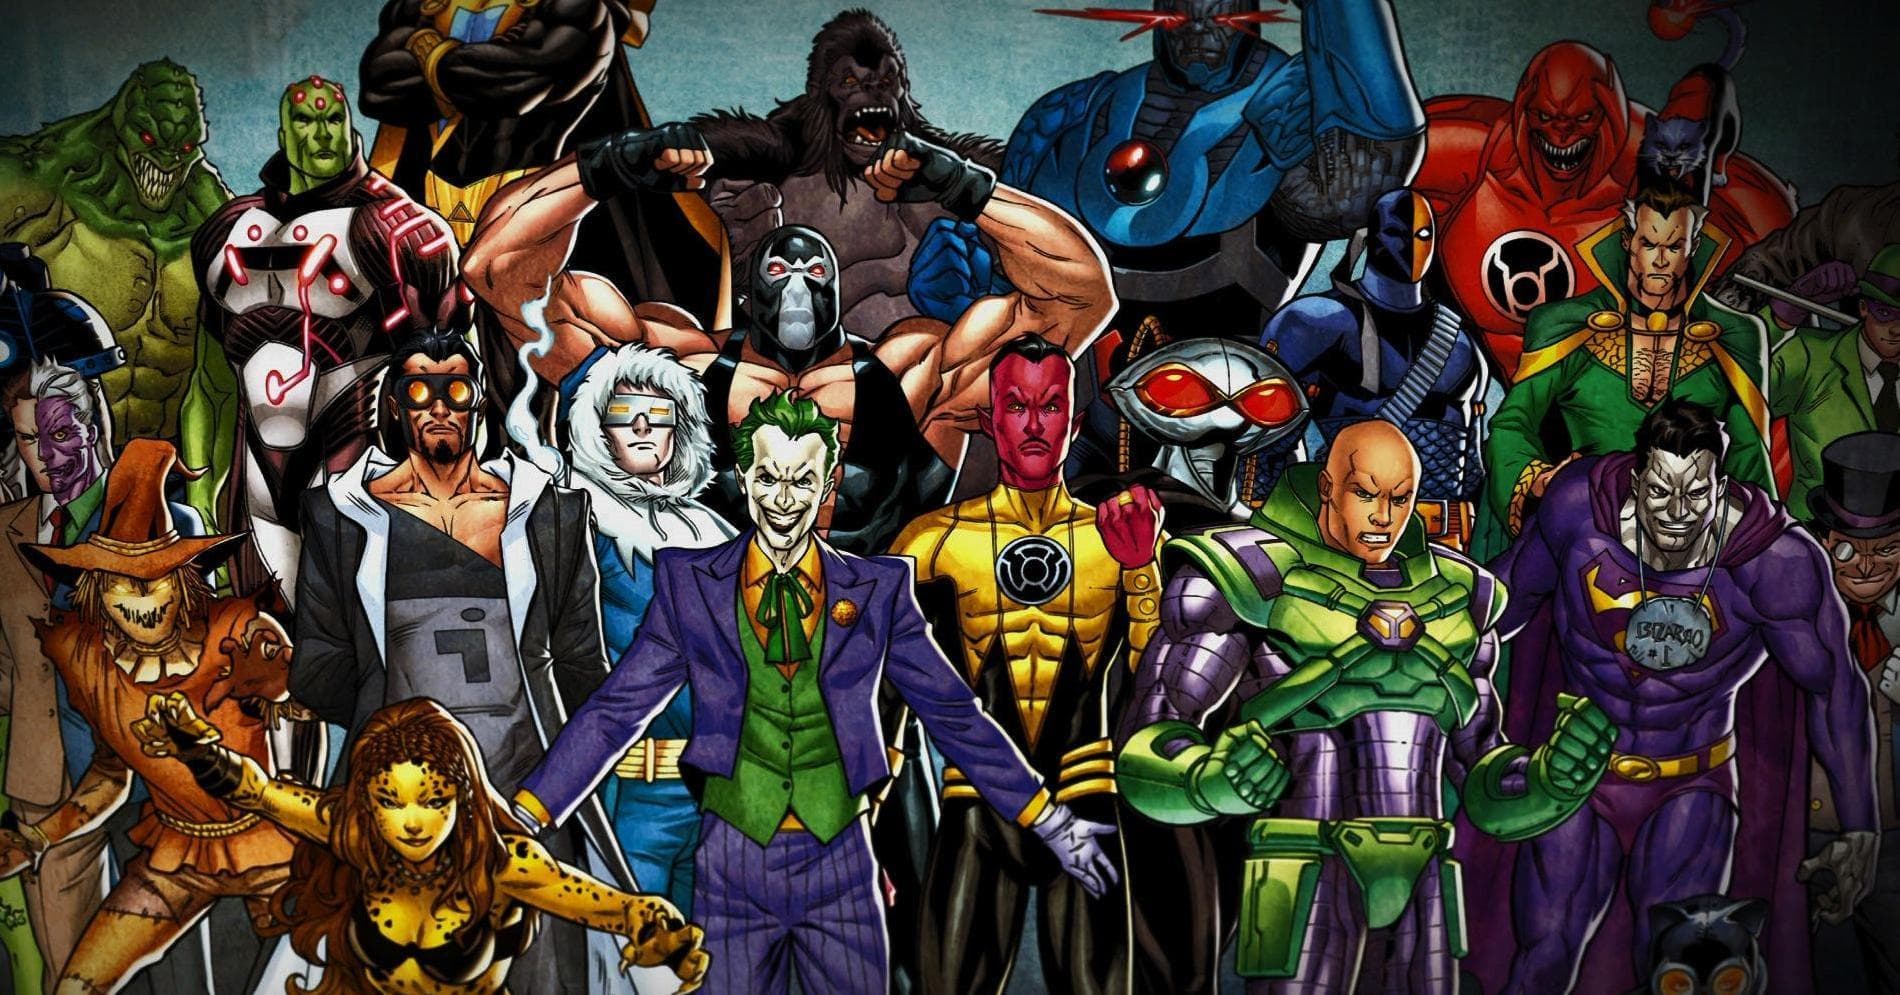 ammunition Gravere Råd The 100 Most Published Superheroes, Ranked By Comic Book Appearances